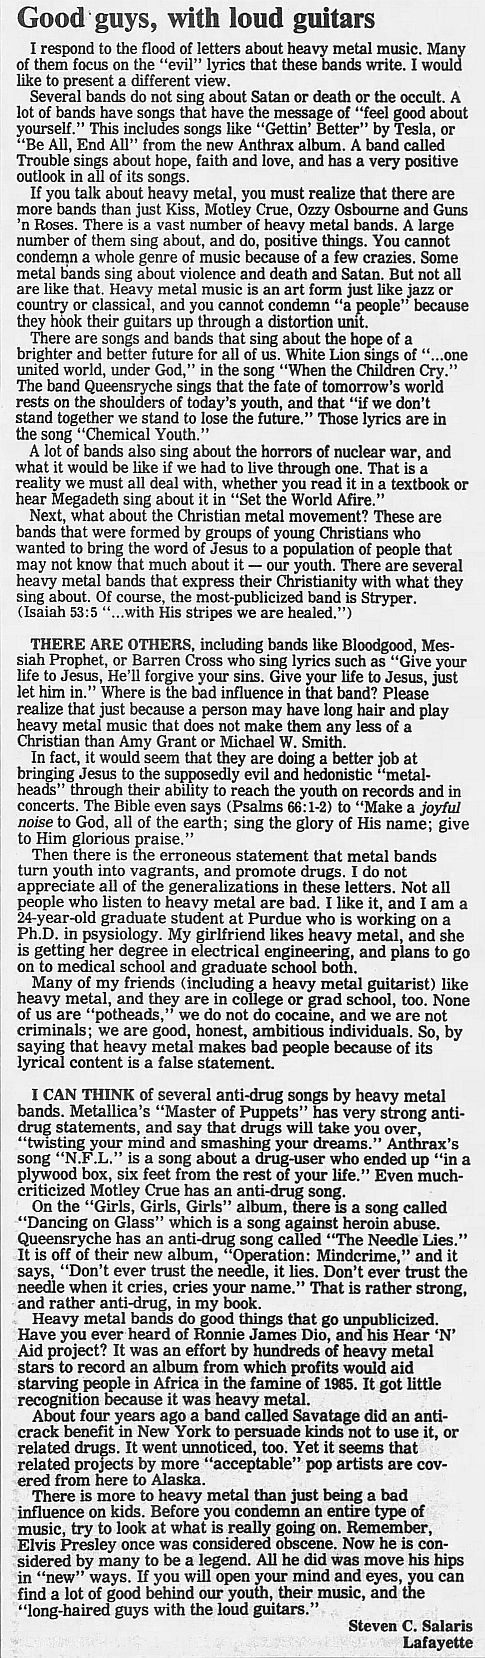 1989.02.21/04.10 - Journal and Courier (Lafayette, IN.) - Readers' letters/Debate on GN'R 9kK8NWkR_o